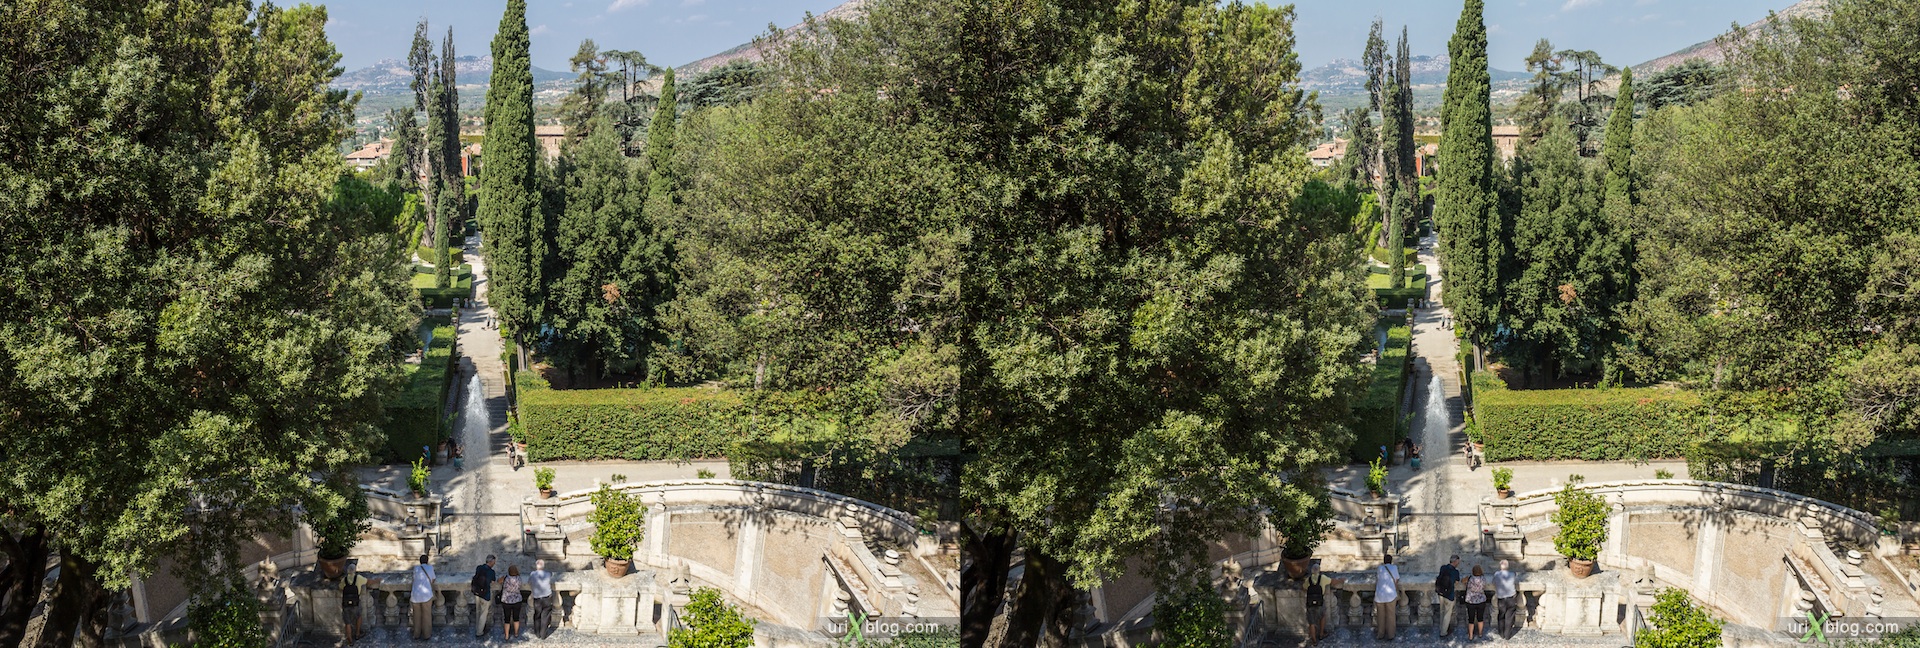 2012, Fountain of the Dragons, villa D'Este, Italy, Tivoli, Rome, 3D, stereo pair, cross-eyed, crossview, cross view stereo pair